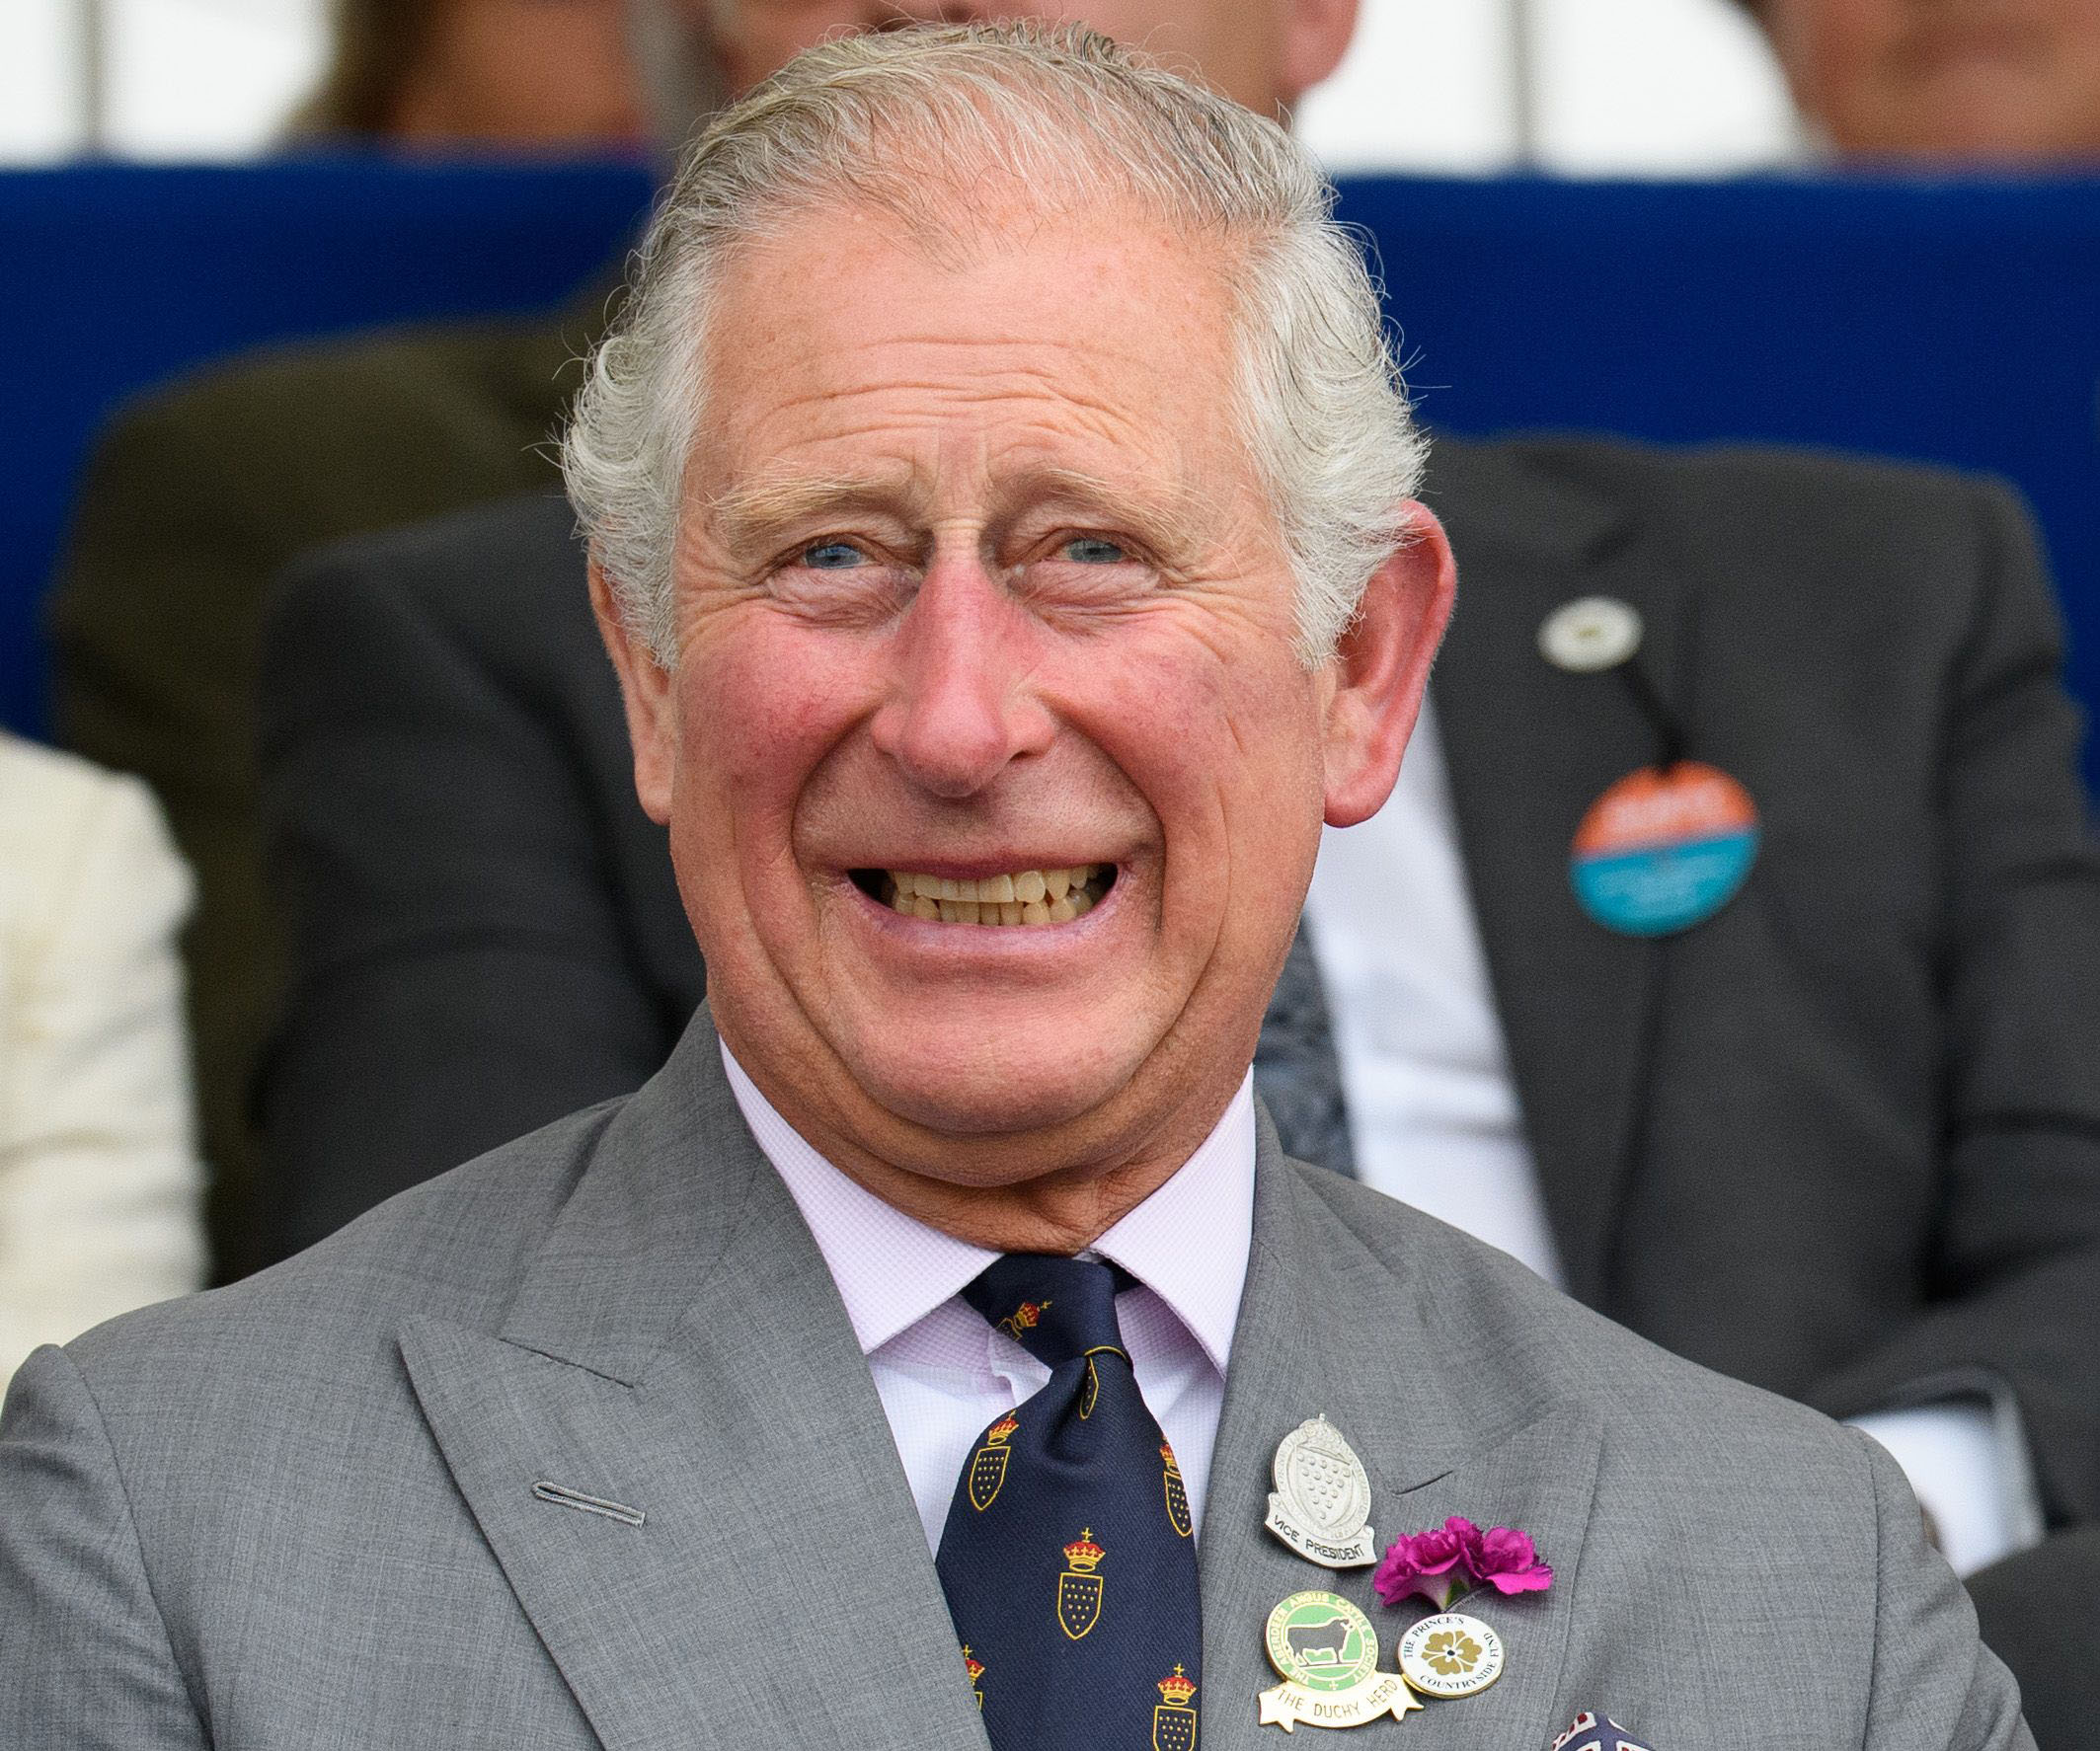 The sweet thing Prince Charles does with his grandchildren will make you melt